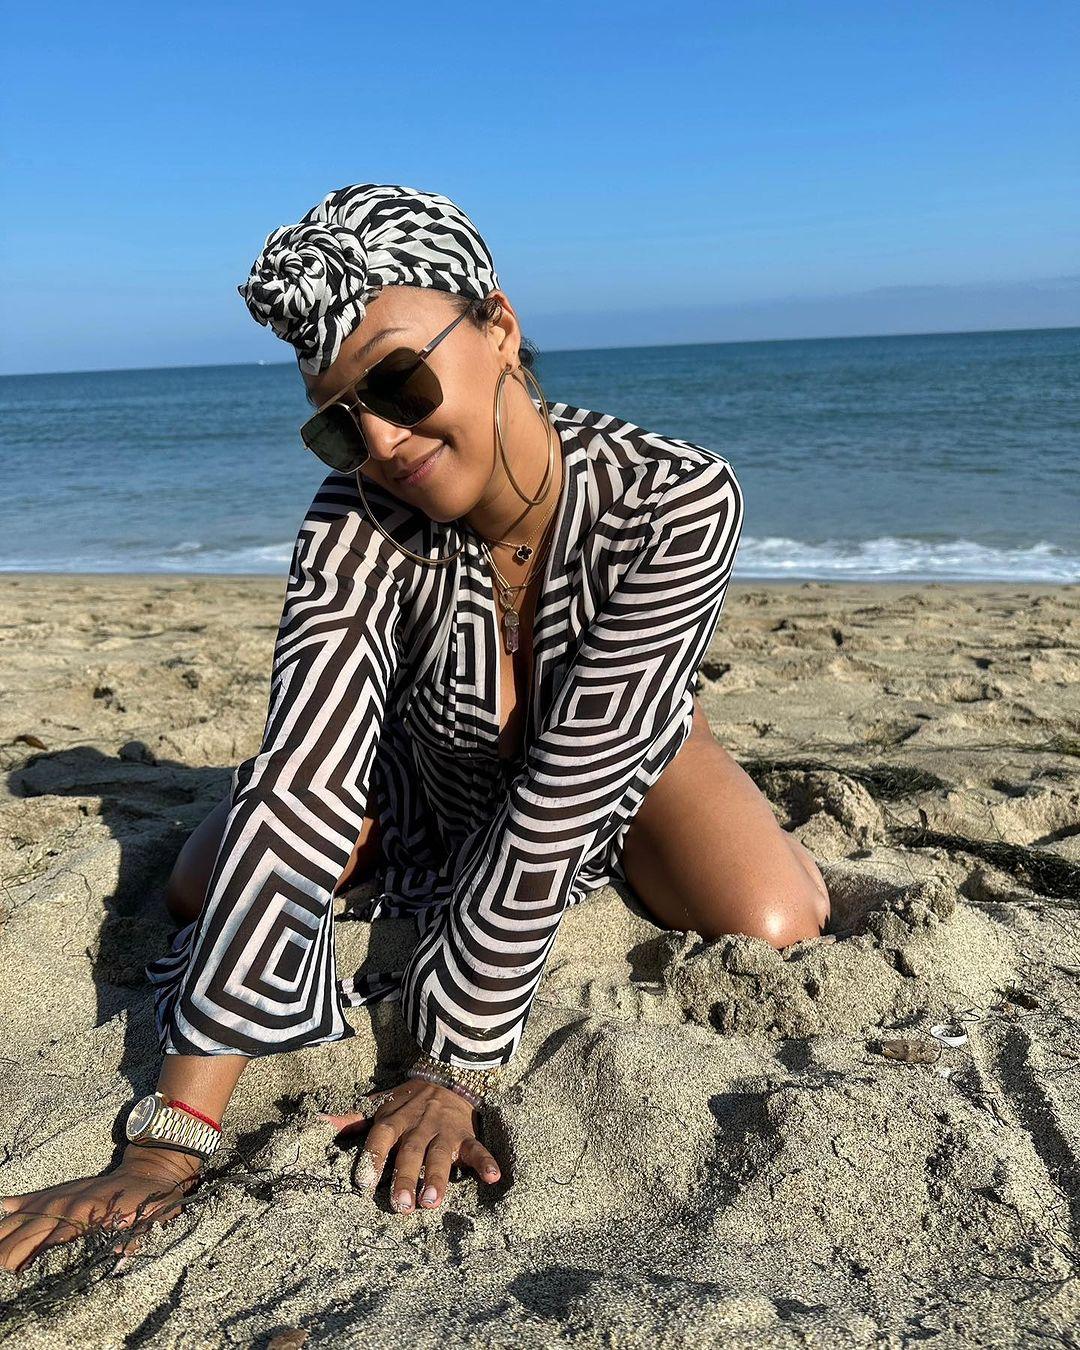 Tia Mowry puts assets on display as she enjoys beach day